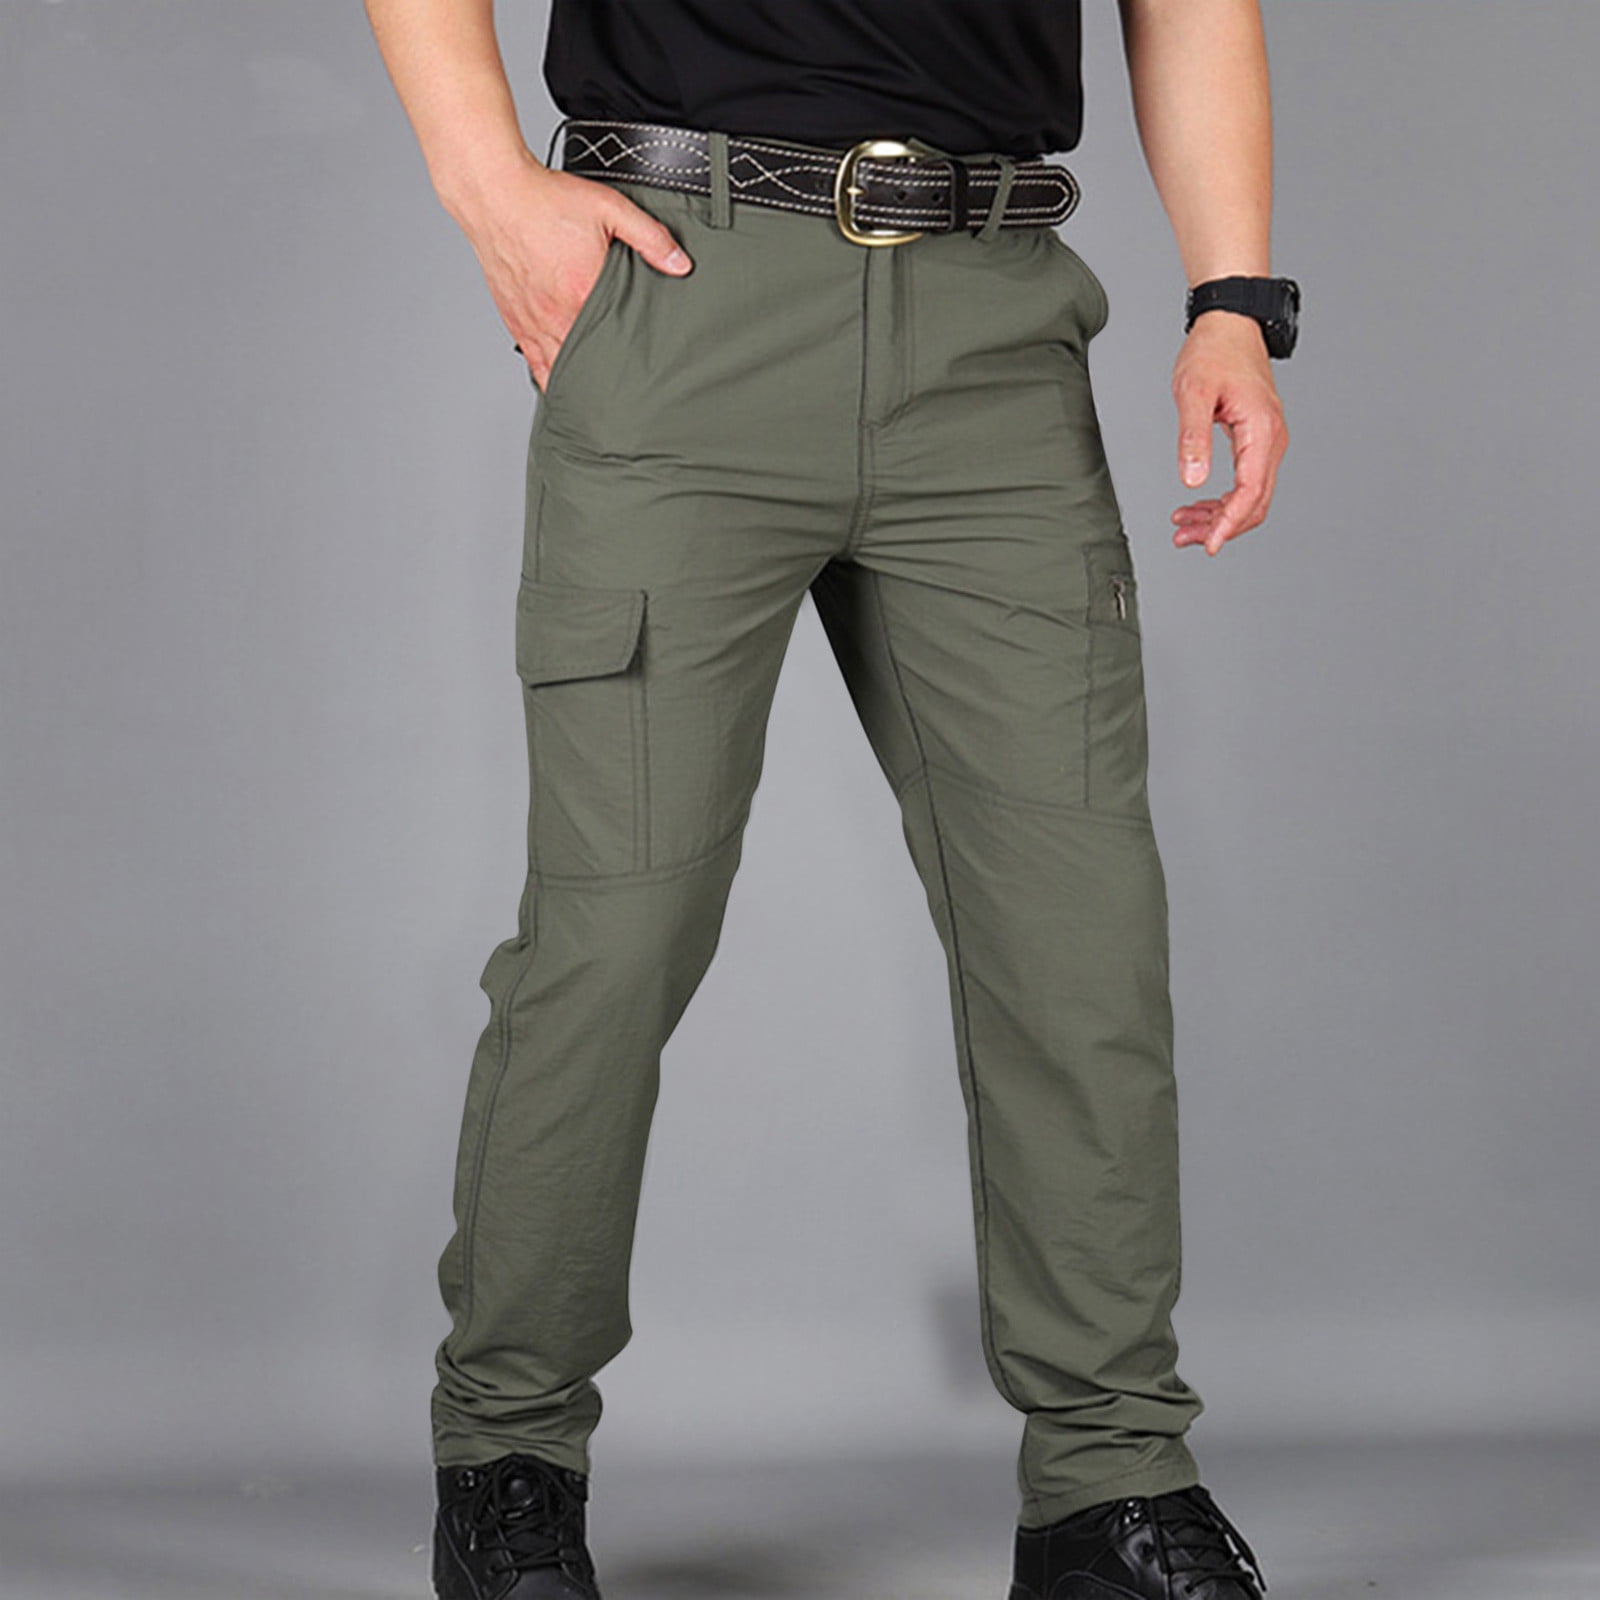 cllios Cargo Pants for Men Big and Tall Work Pants Outdoor Hiking ...